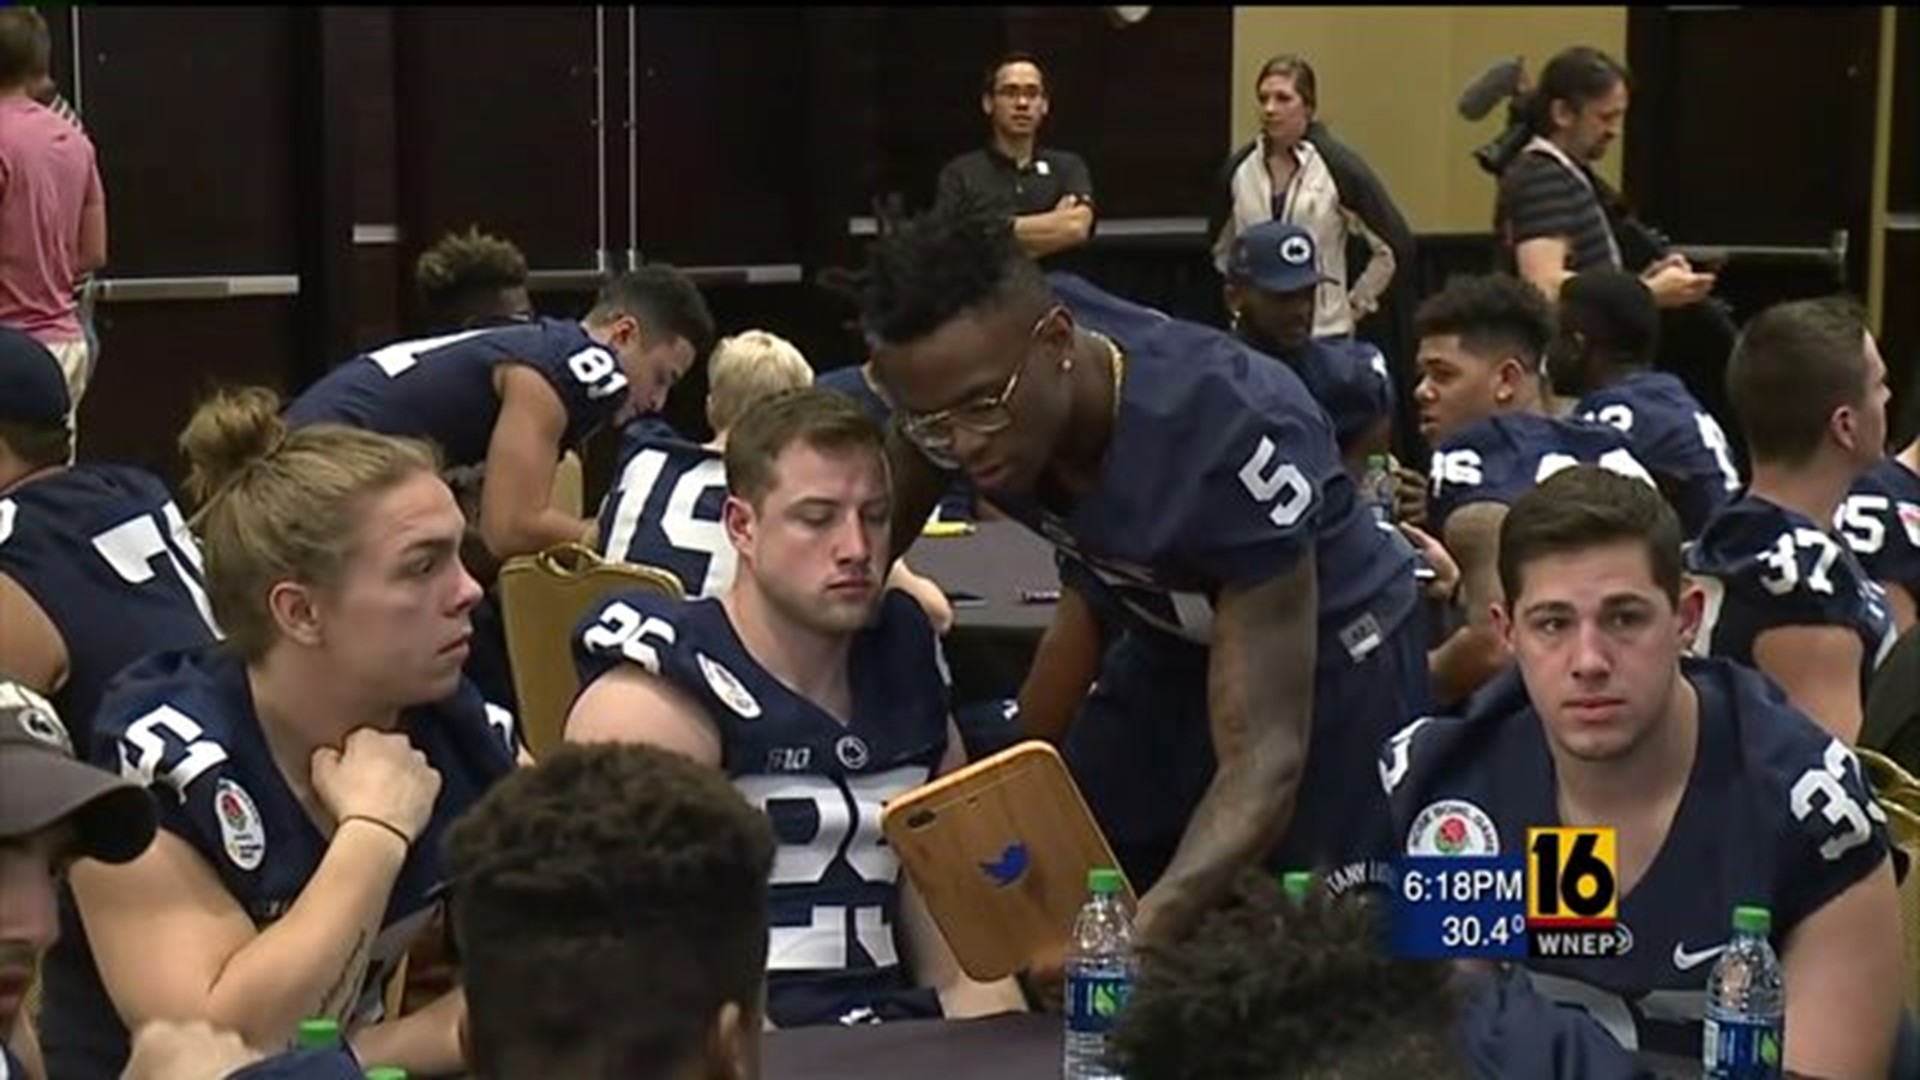 The Penn State Nittanyy Lions Hold Rose Bowl Media Event